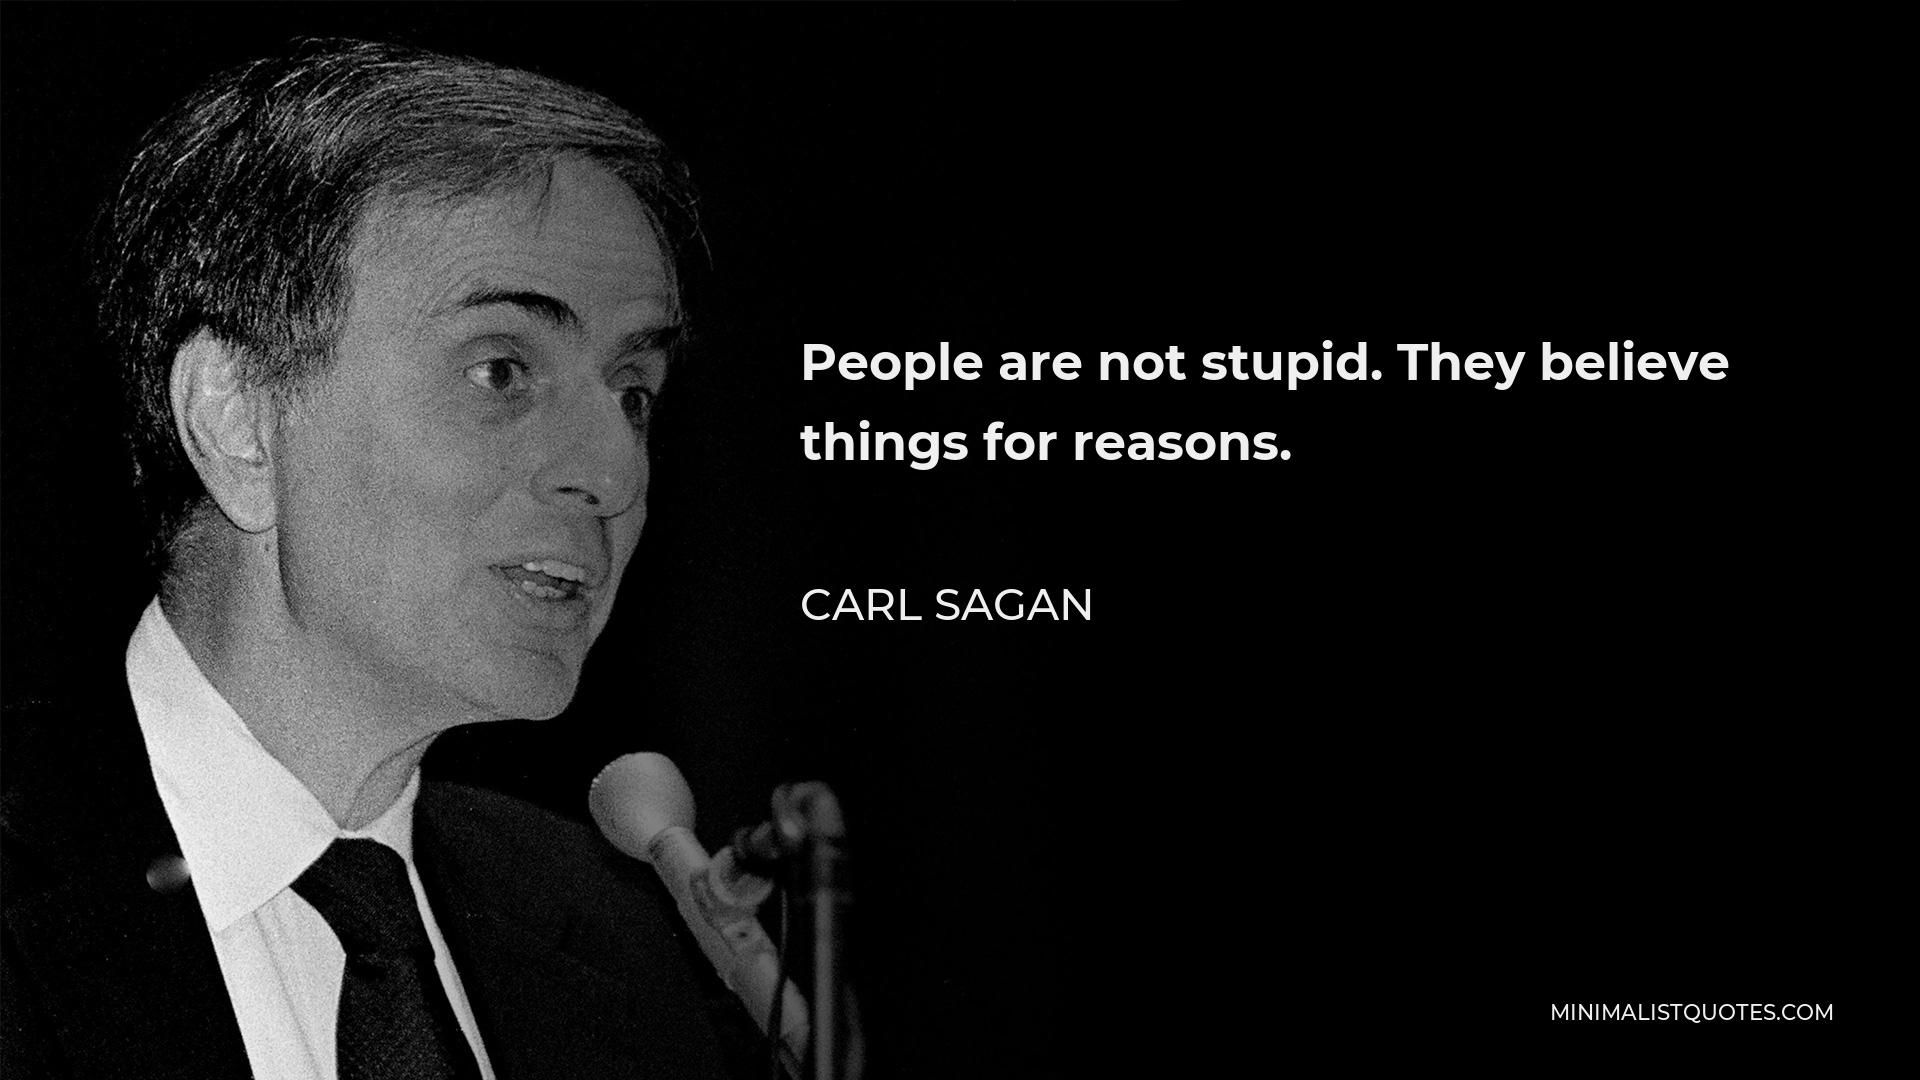 Carl Sagan Quote - People are not stupid. They believe things for reasons.